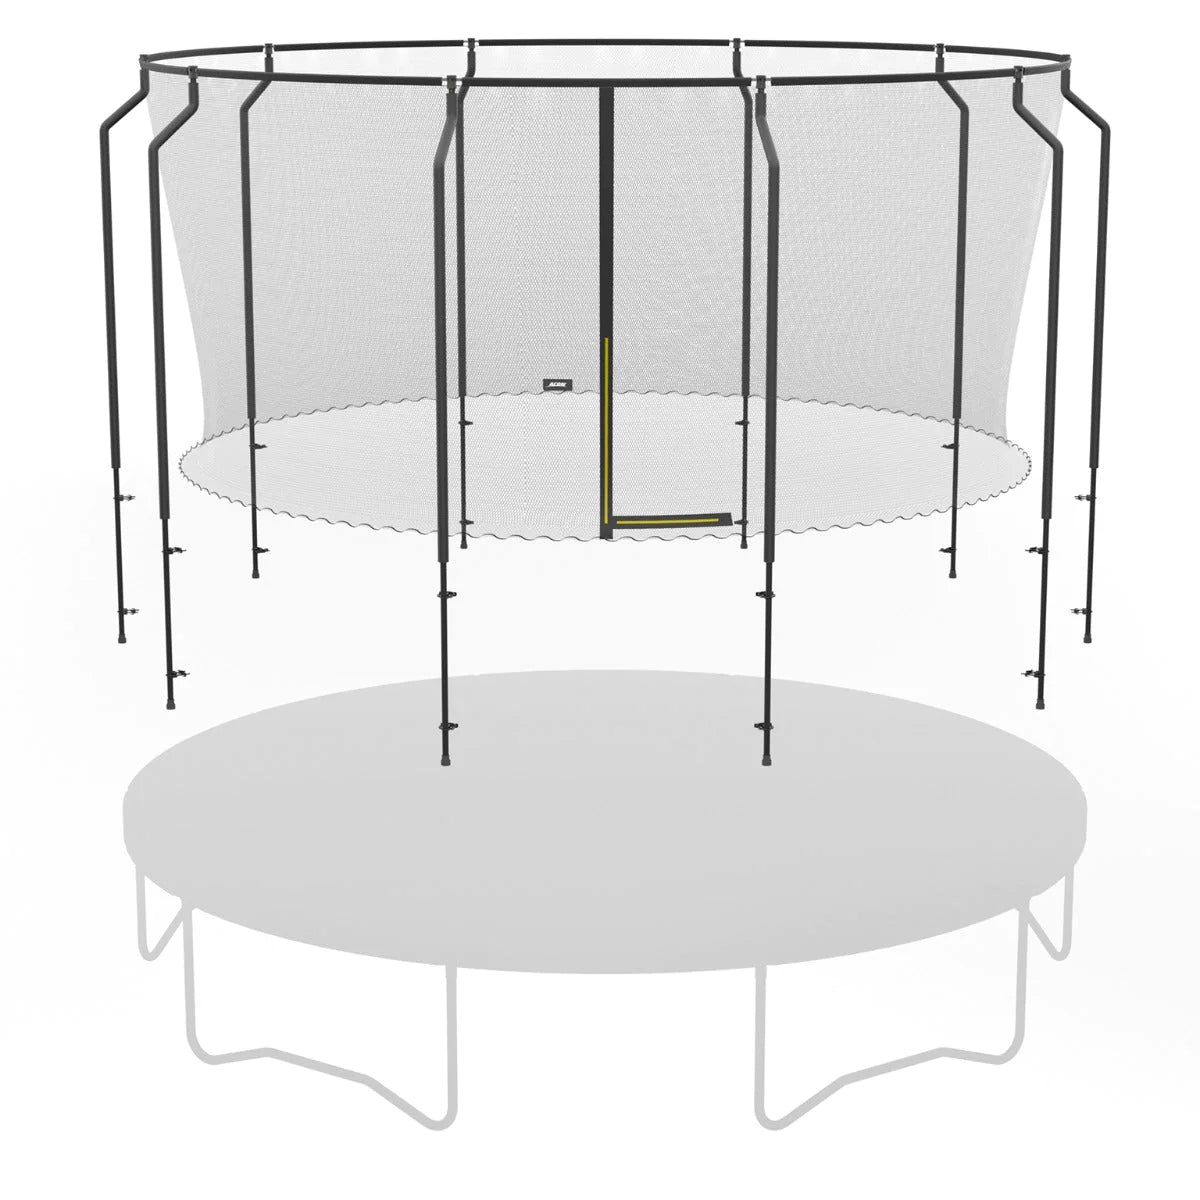 A round trampoline enclosure product image